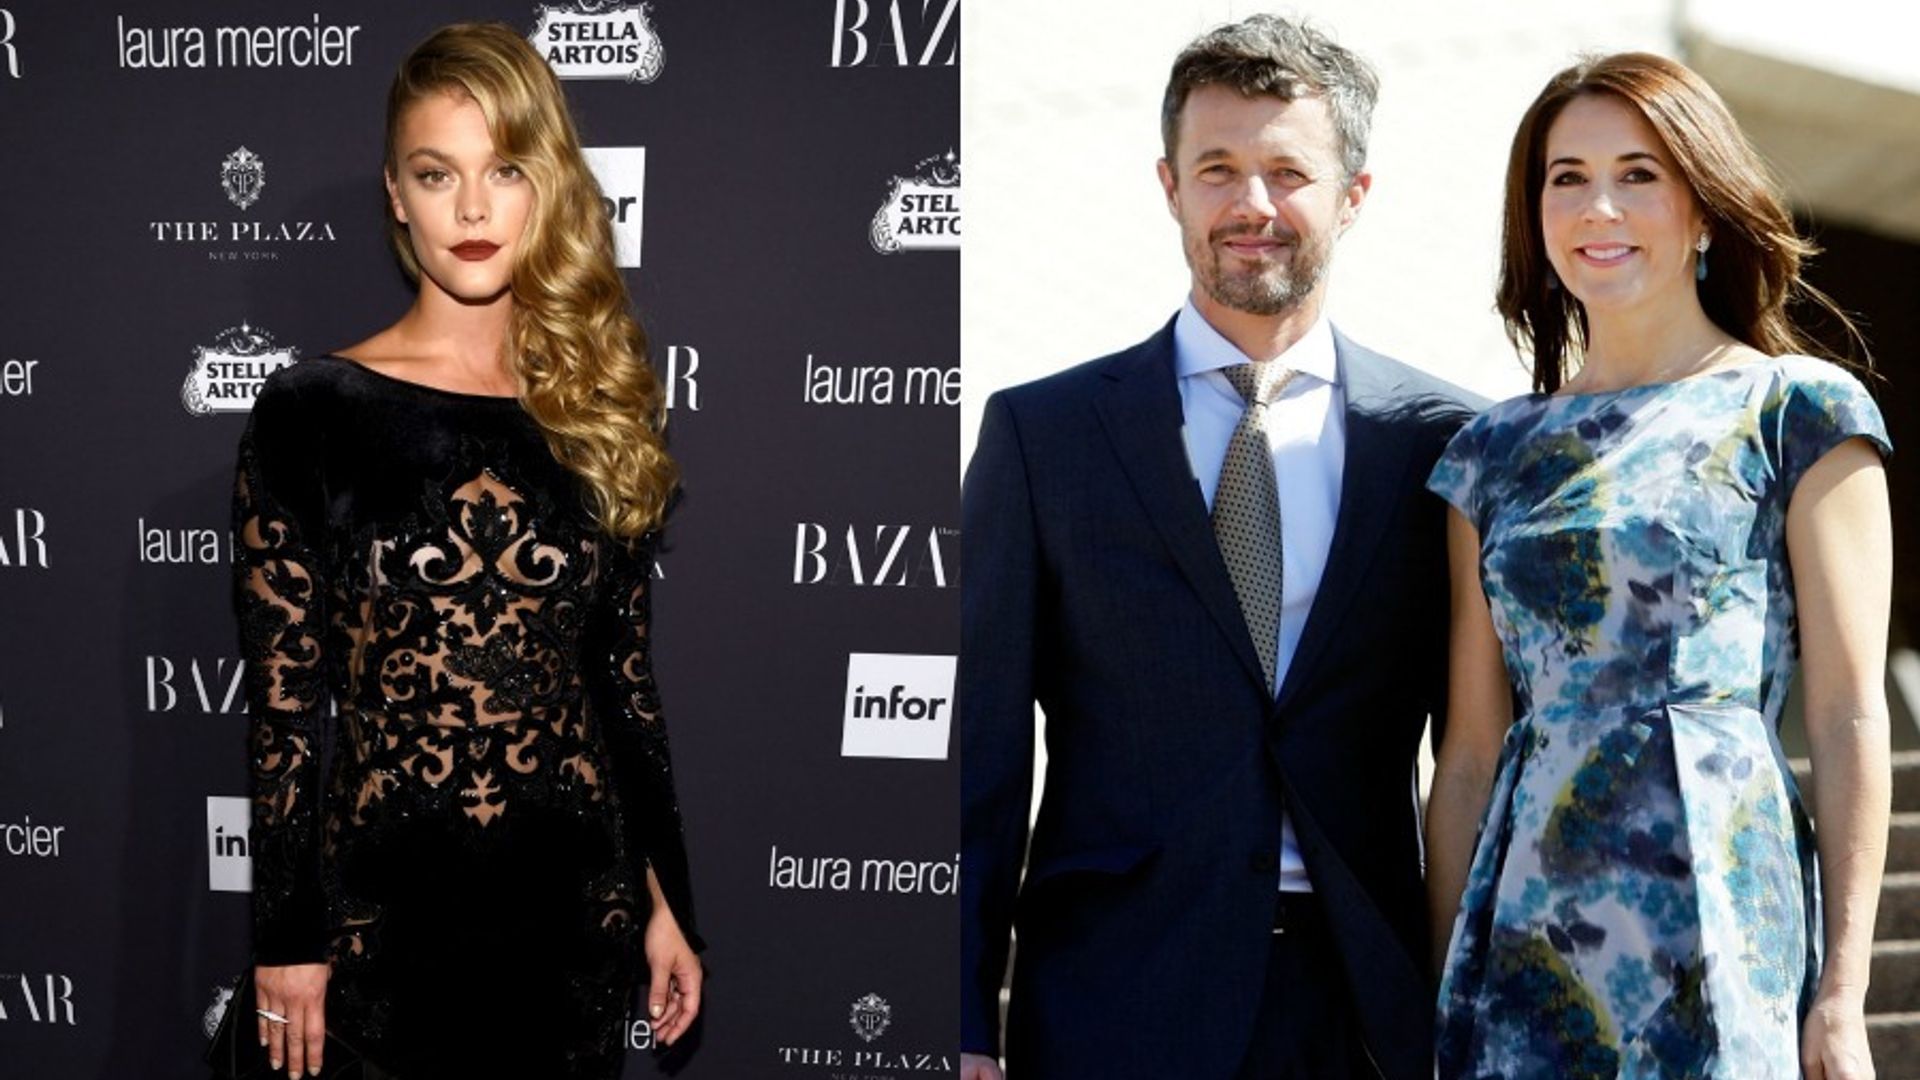 Danish model Nina Agdal had a royal encounter with Crown Princess Mary and Crown Prince Frederik at a movie theater